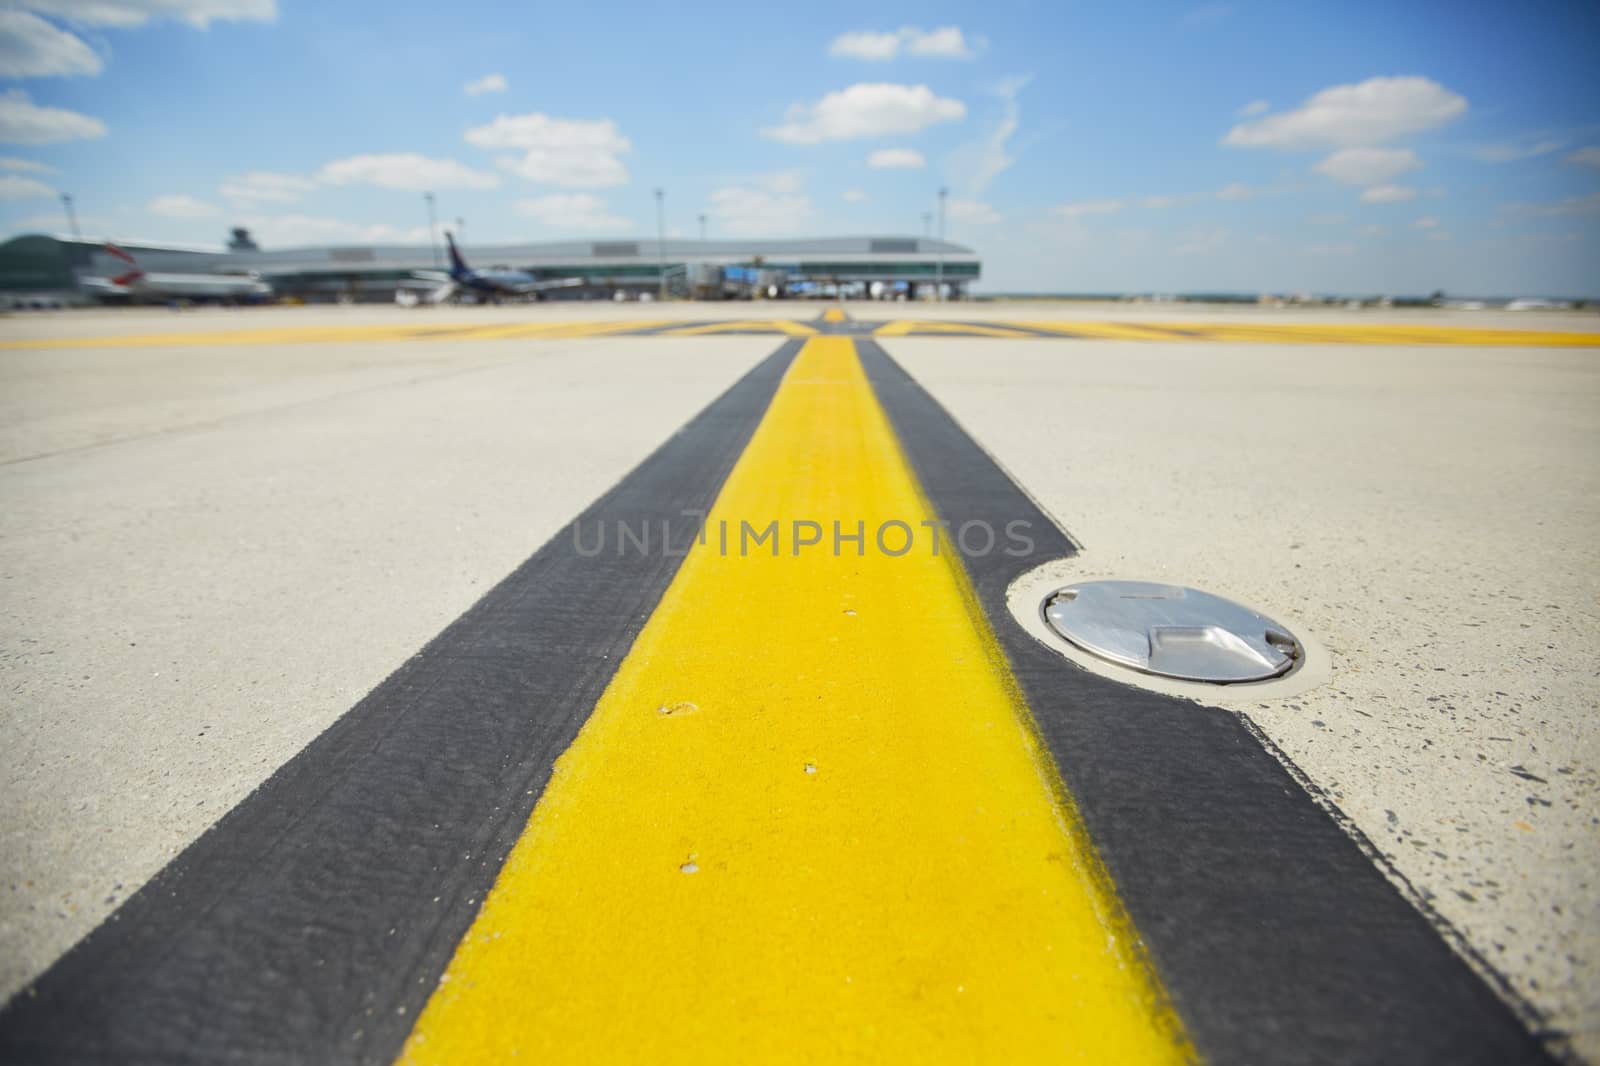 Marking on taxiway is heading to runway - selective focus